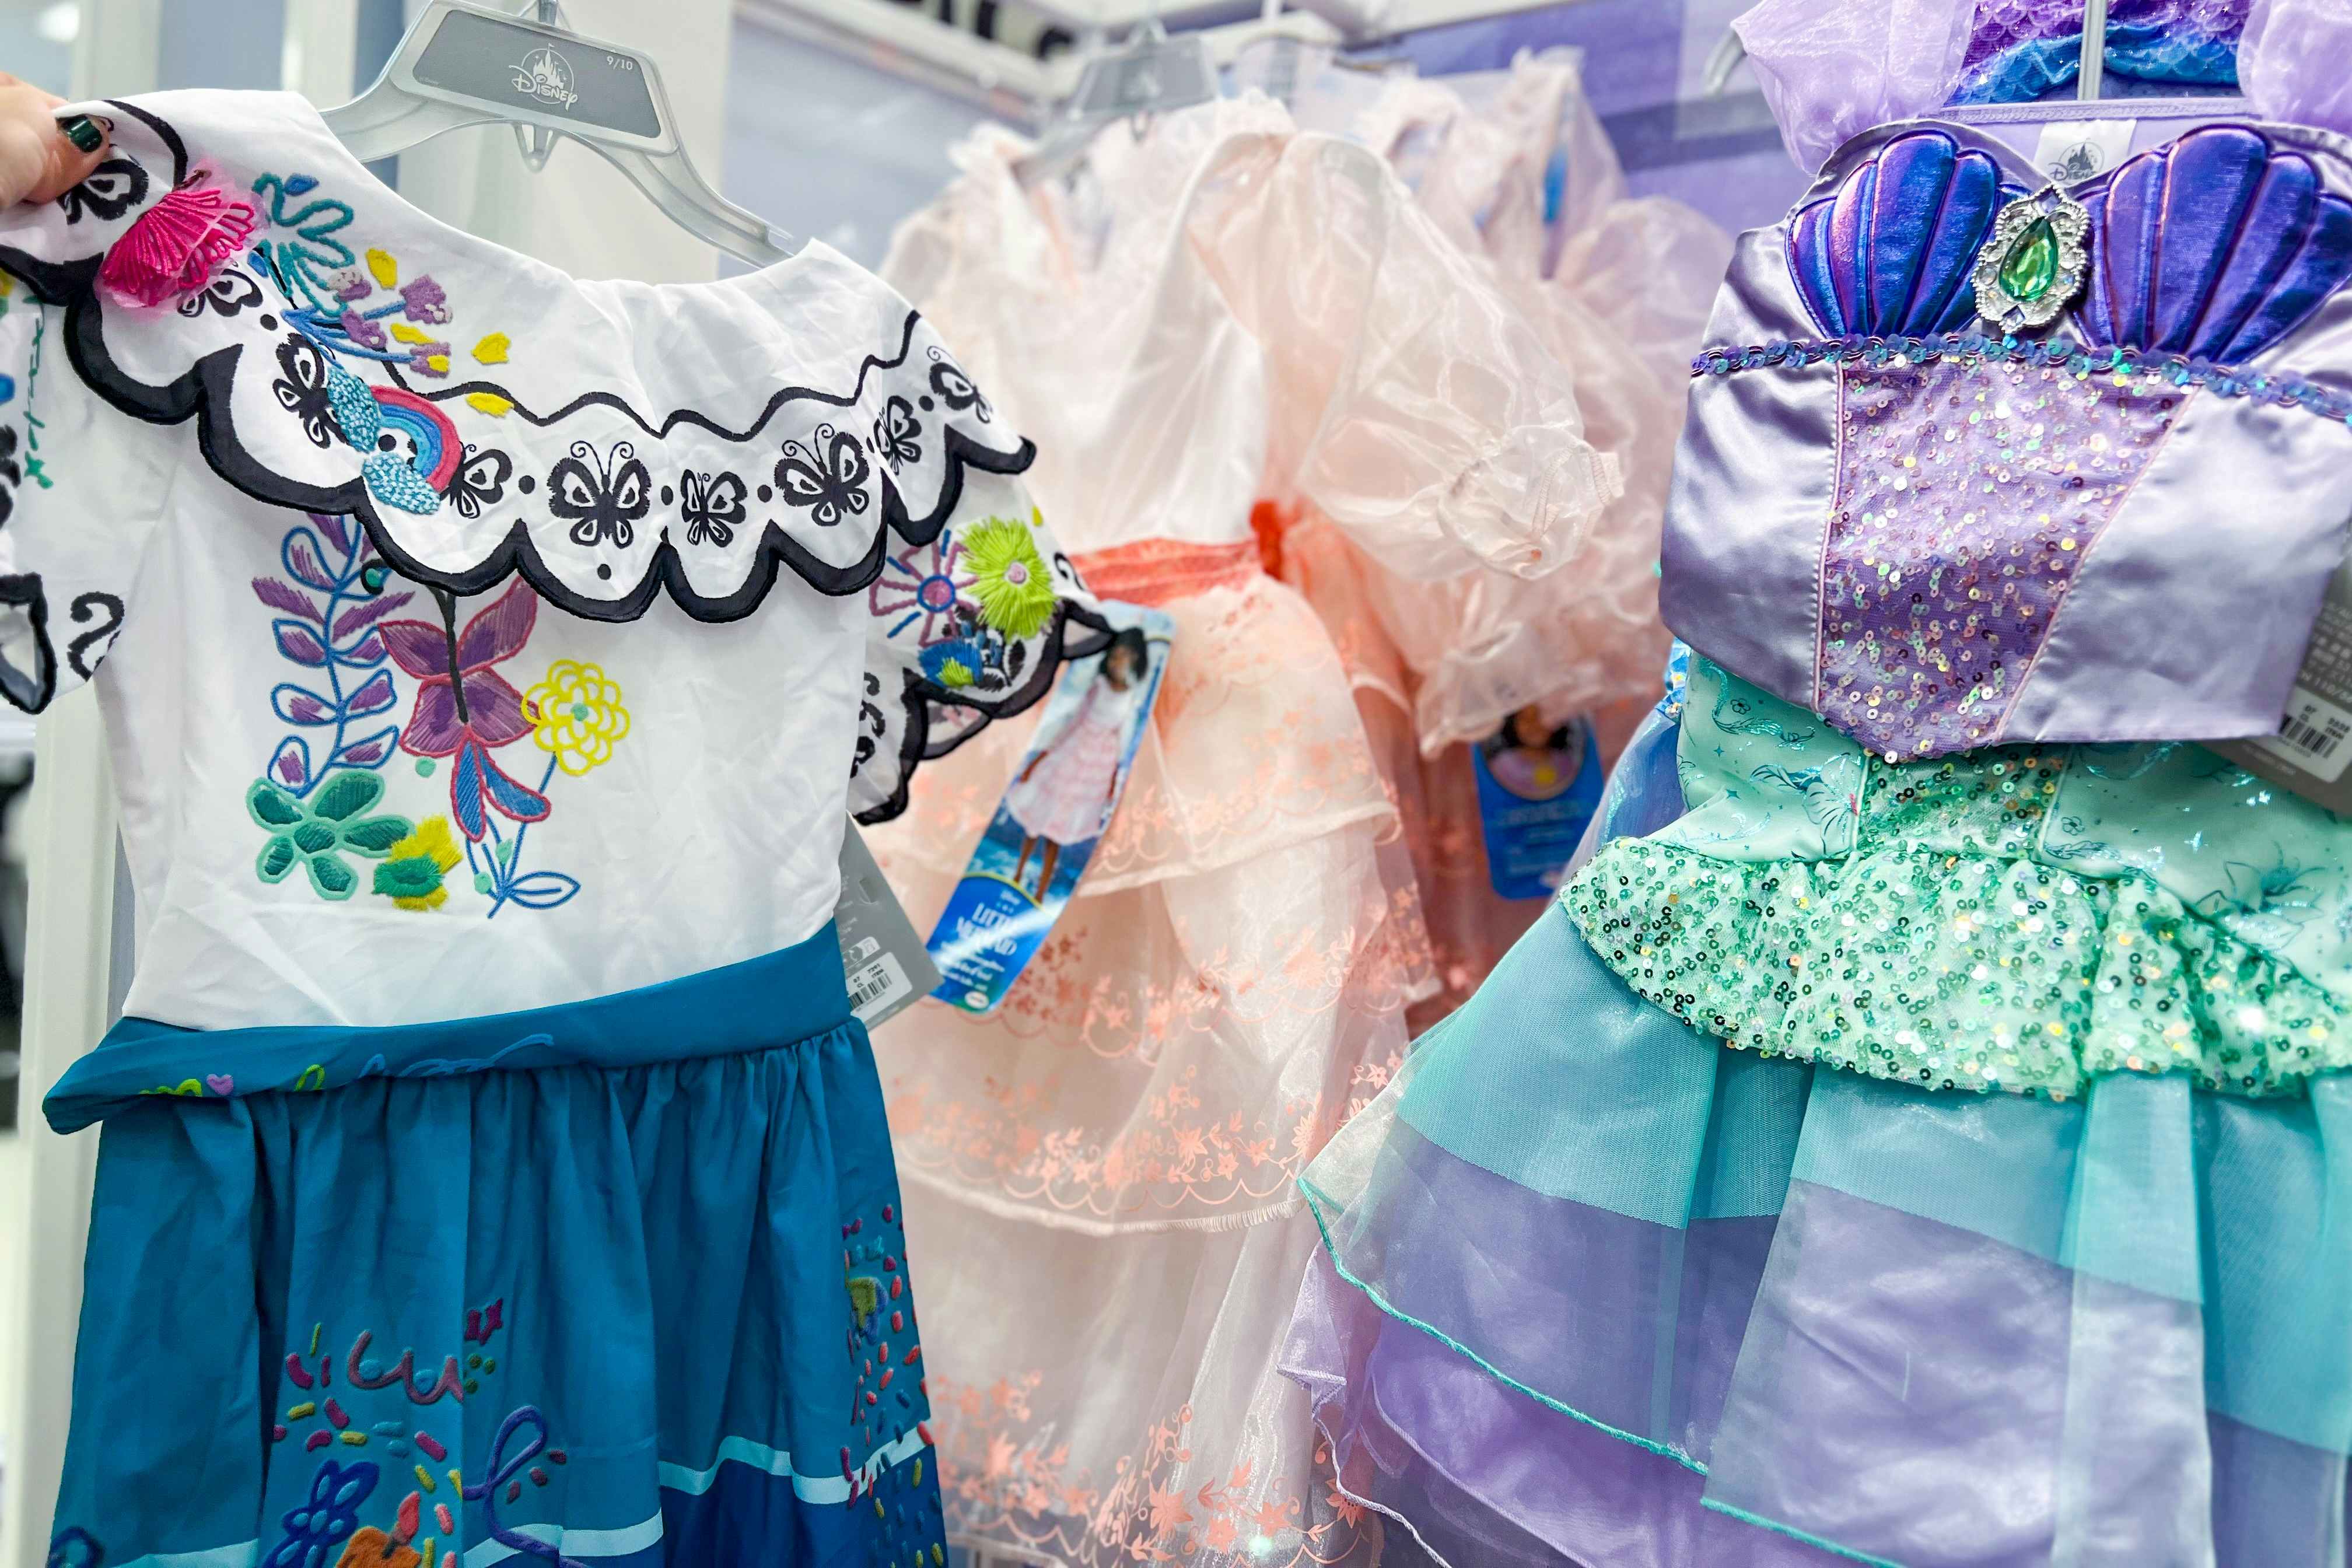 Save on Kids' Costumes at the Disney Store — Prices Start at $30